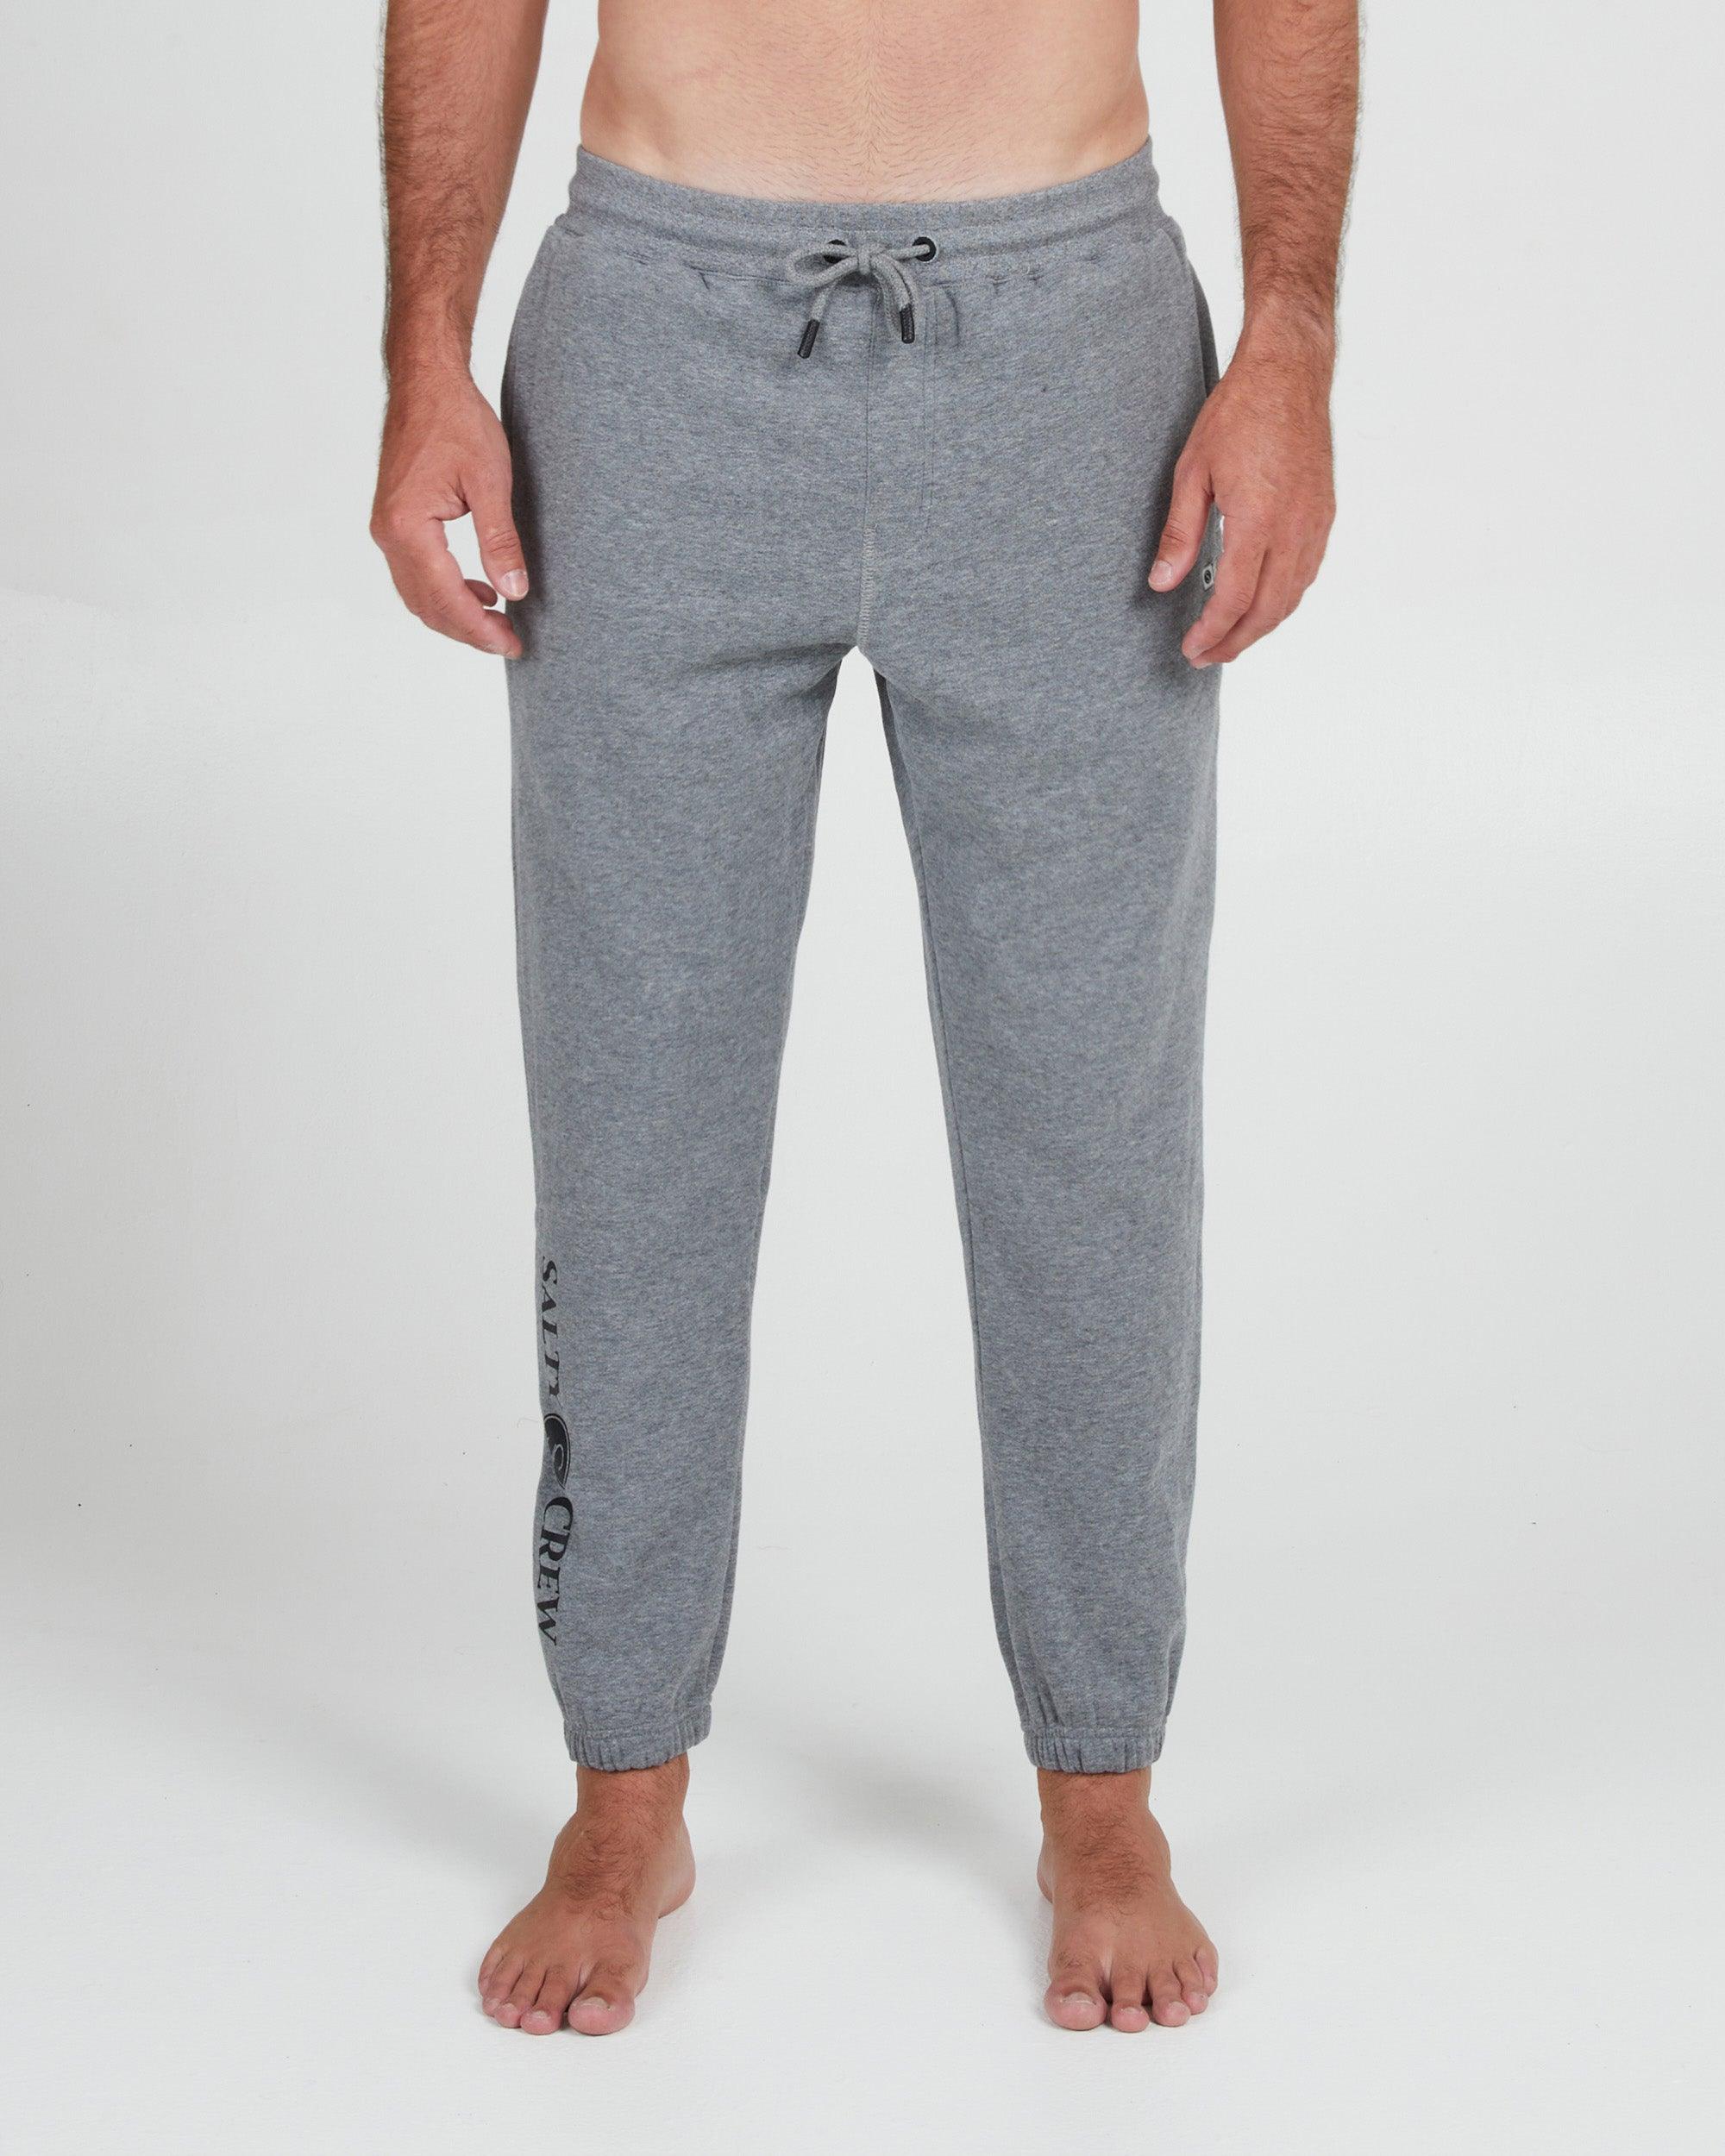 Dockside Sweatpant - Grey/Heather - Purpose-Built / Home of the Trades